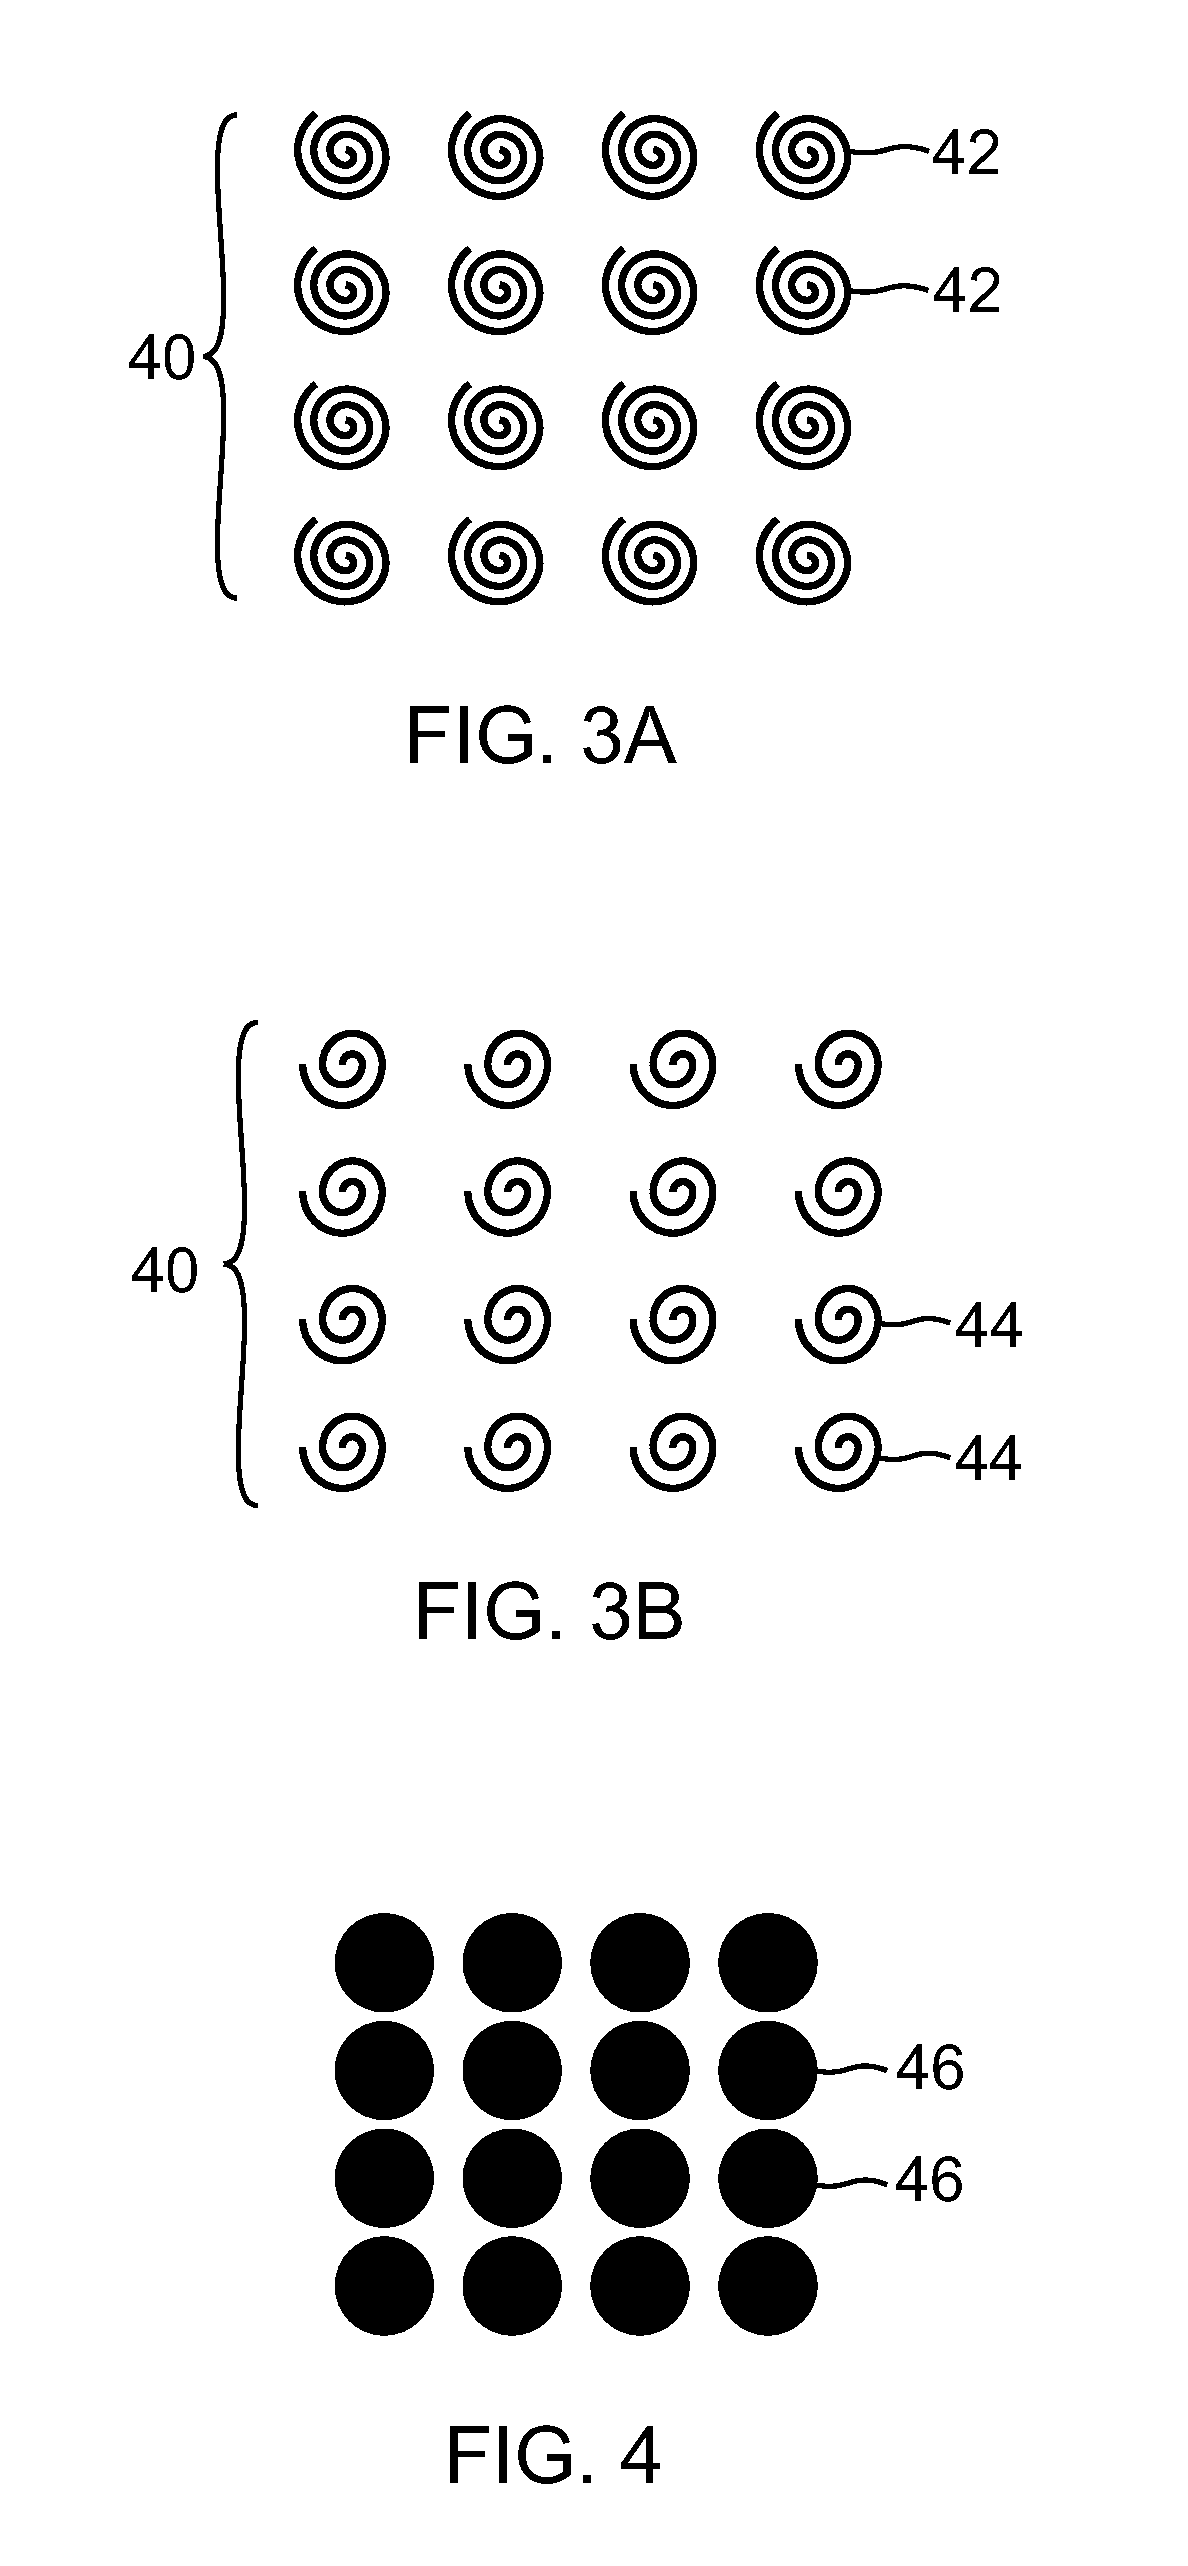 System and Methods of Tissue Microablation Using Fractional Treatment Patterns